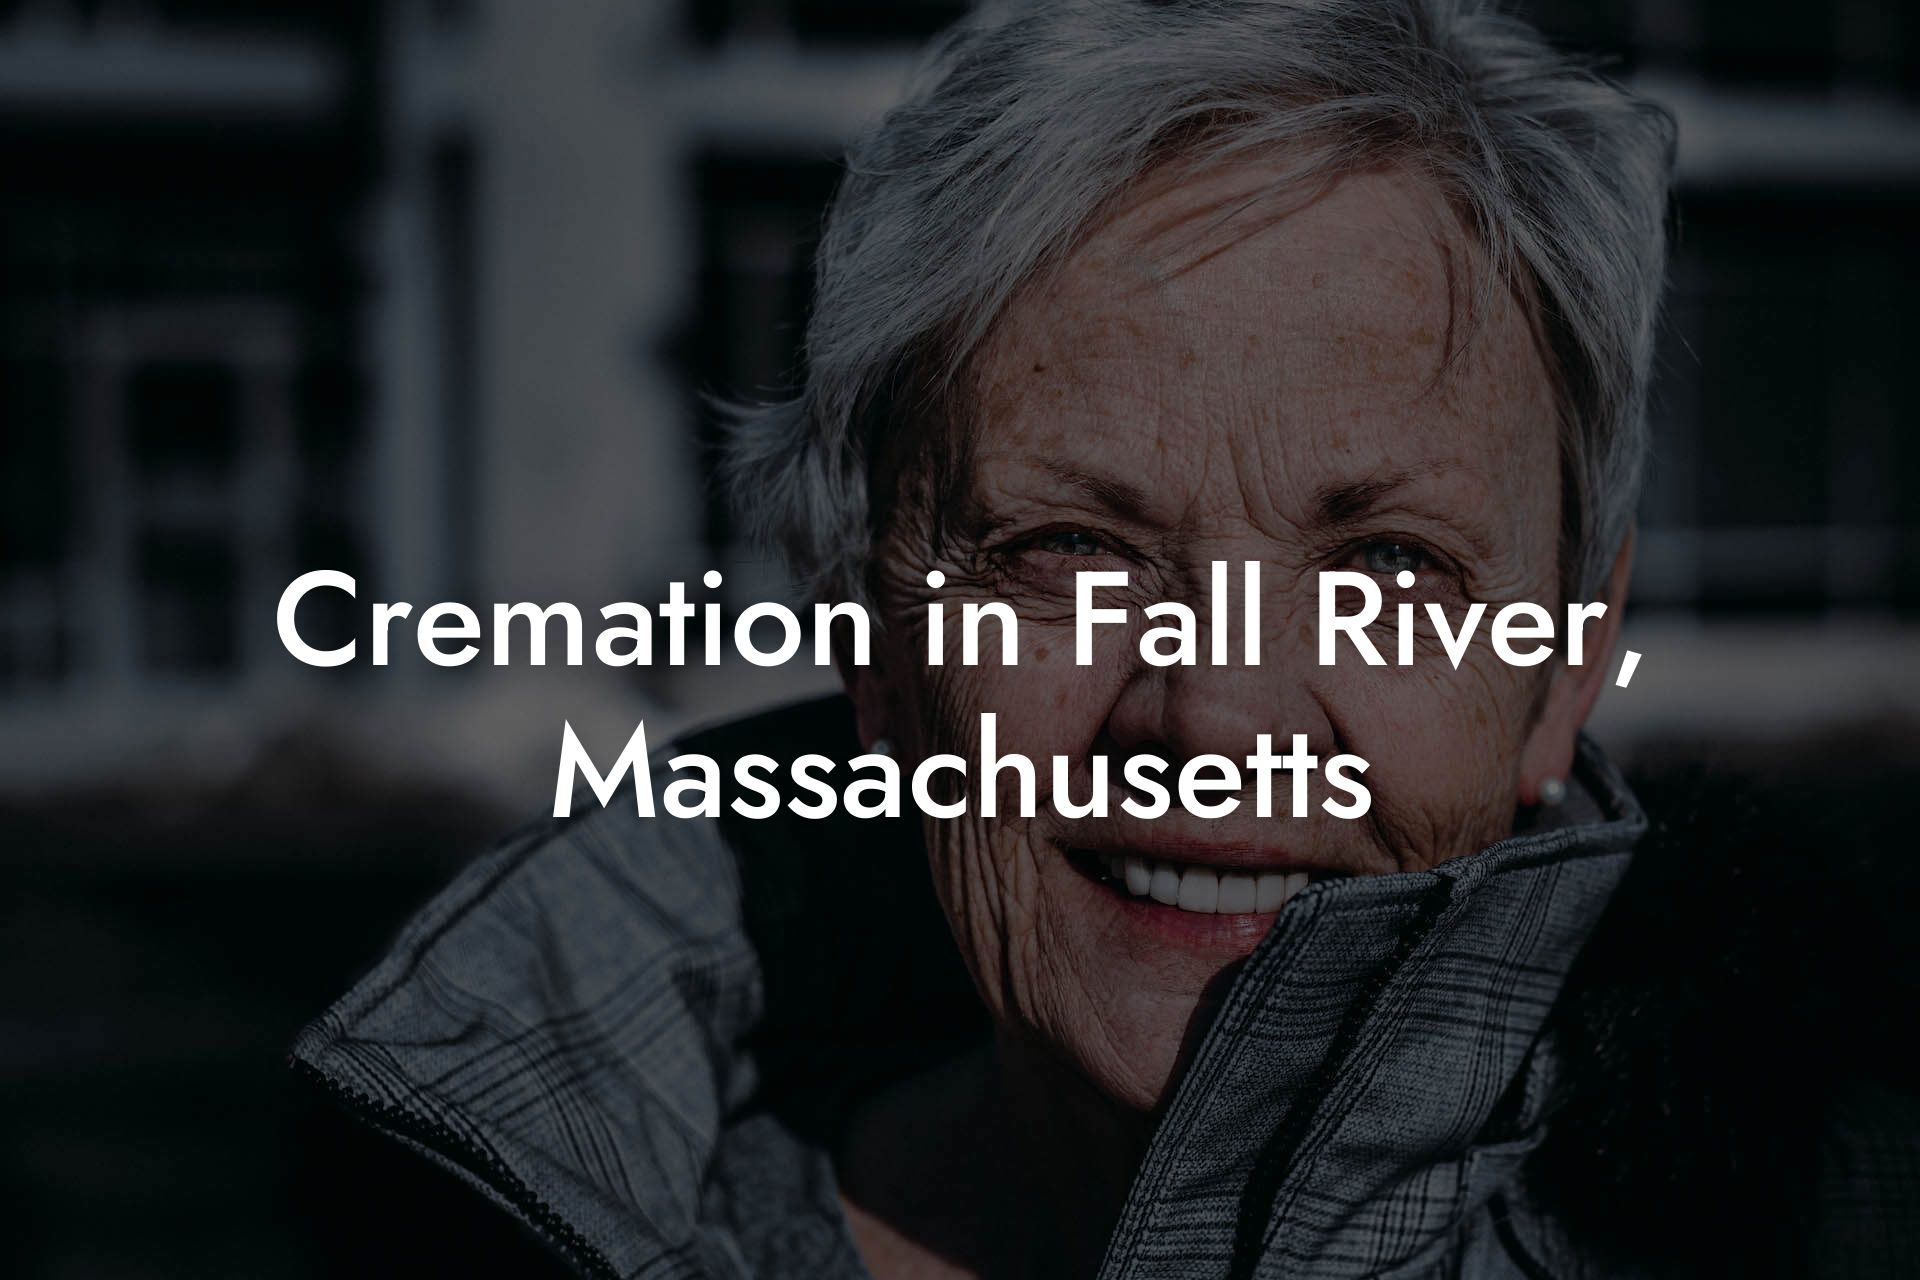 Cremation in Fall River, Massachusetts